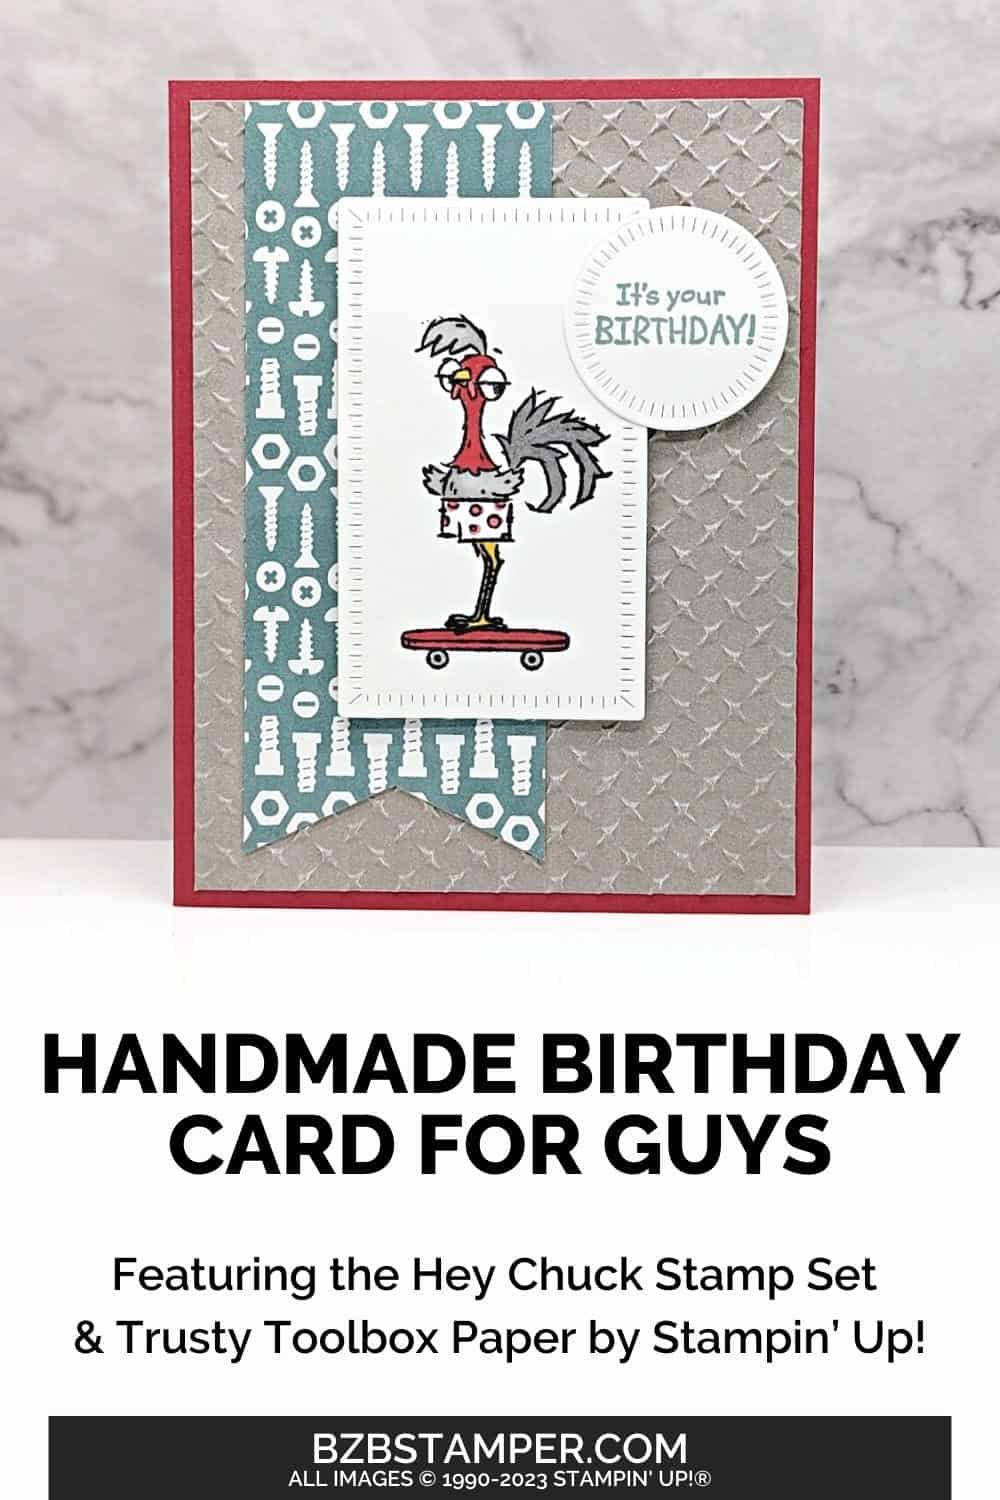 Handmade Birthday Cards for Men featuring a rooster on a skateboard with pretty paper featuring screws.